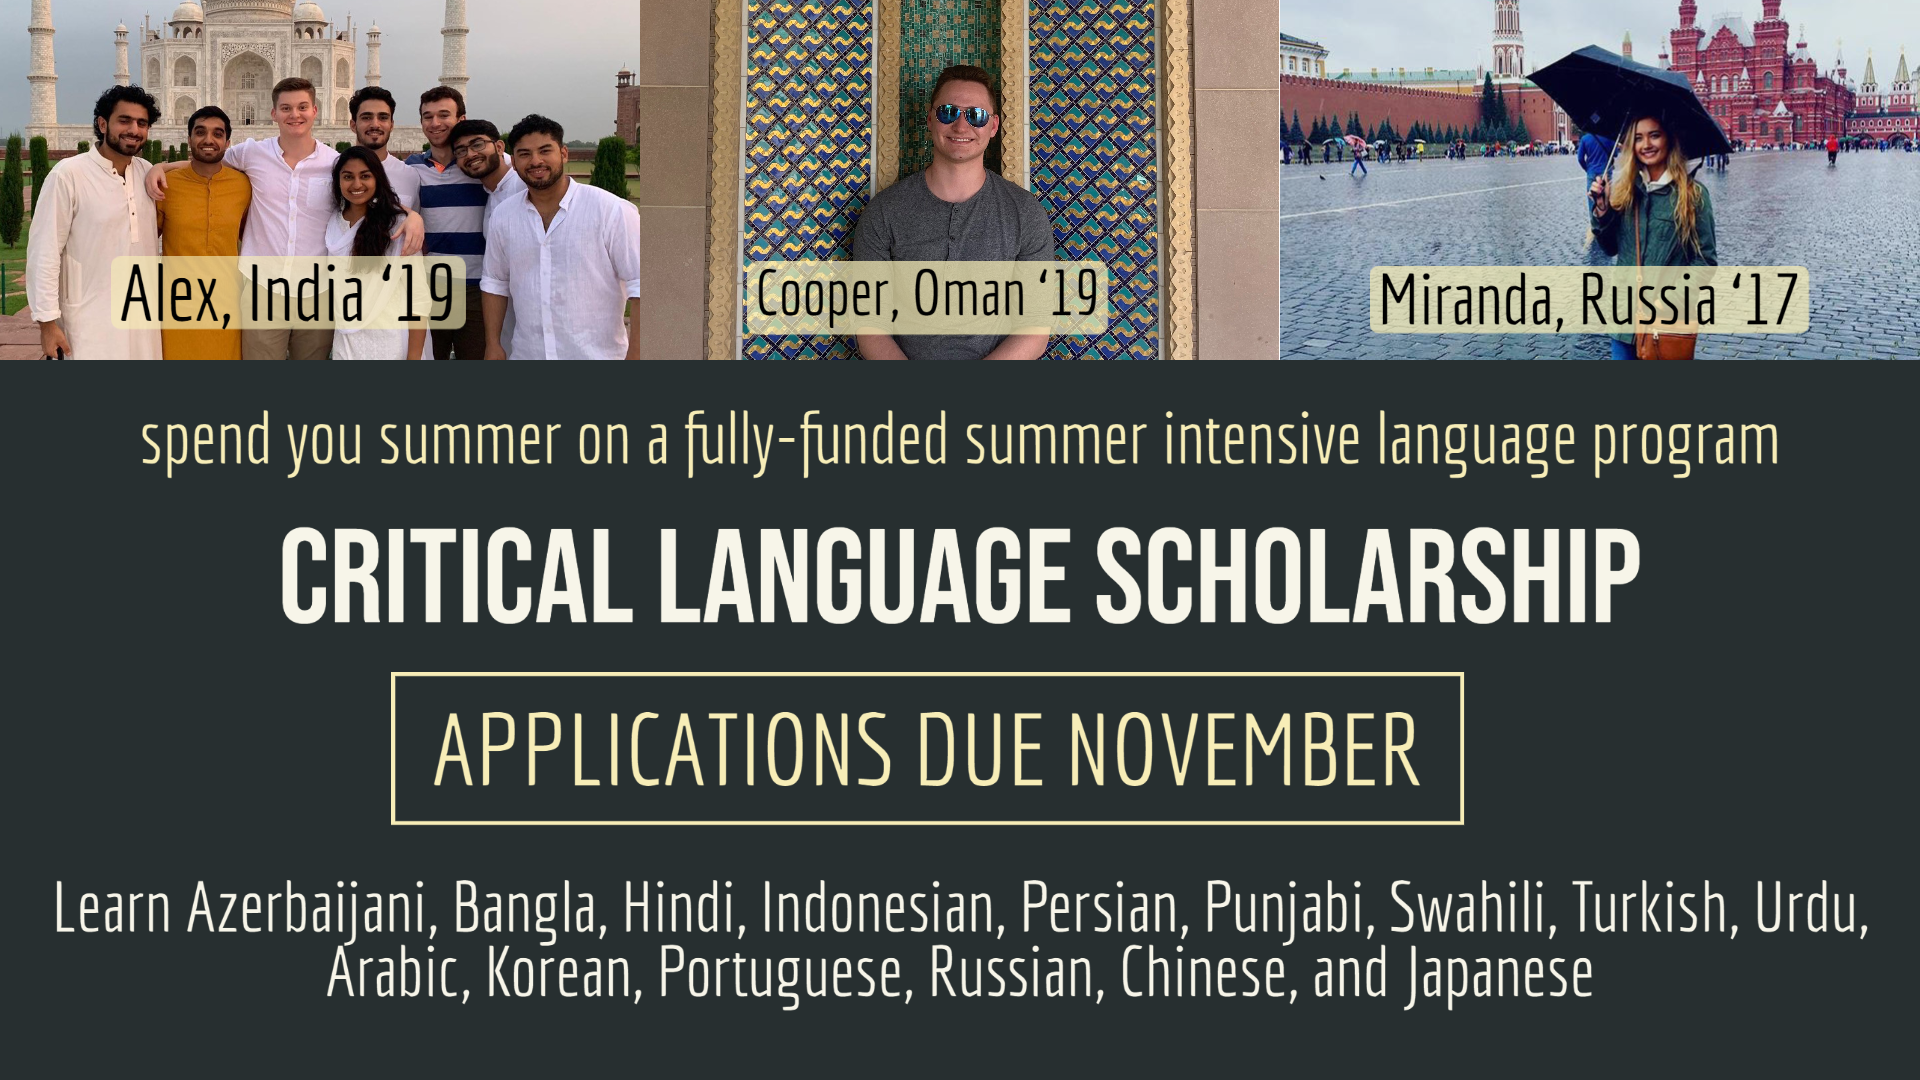 Apply for a Critical Language Scholarship